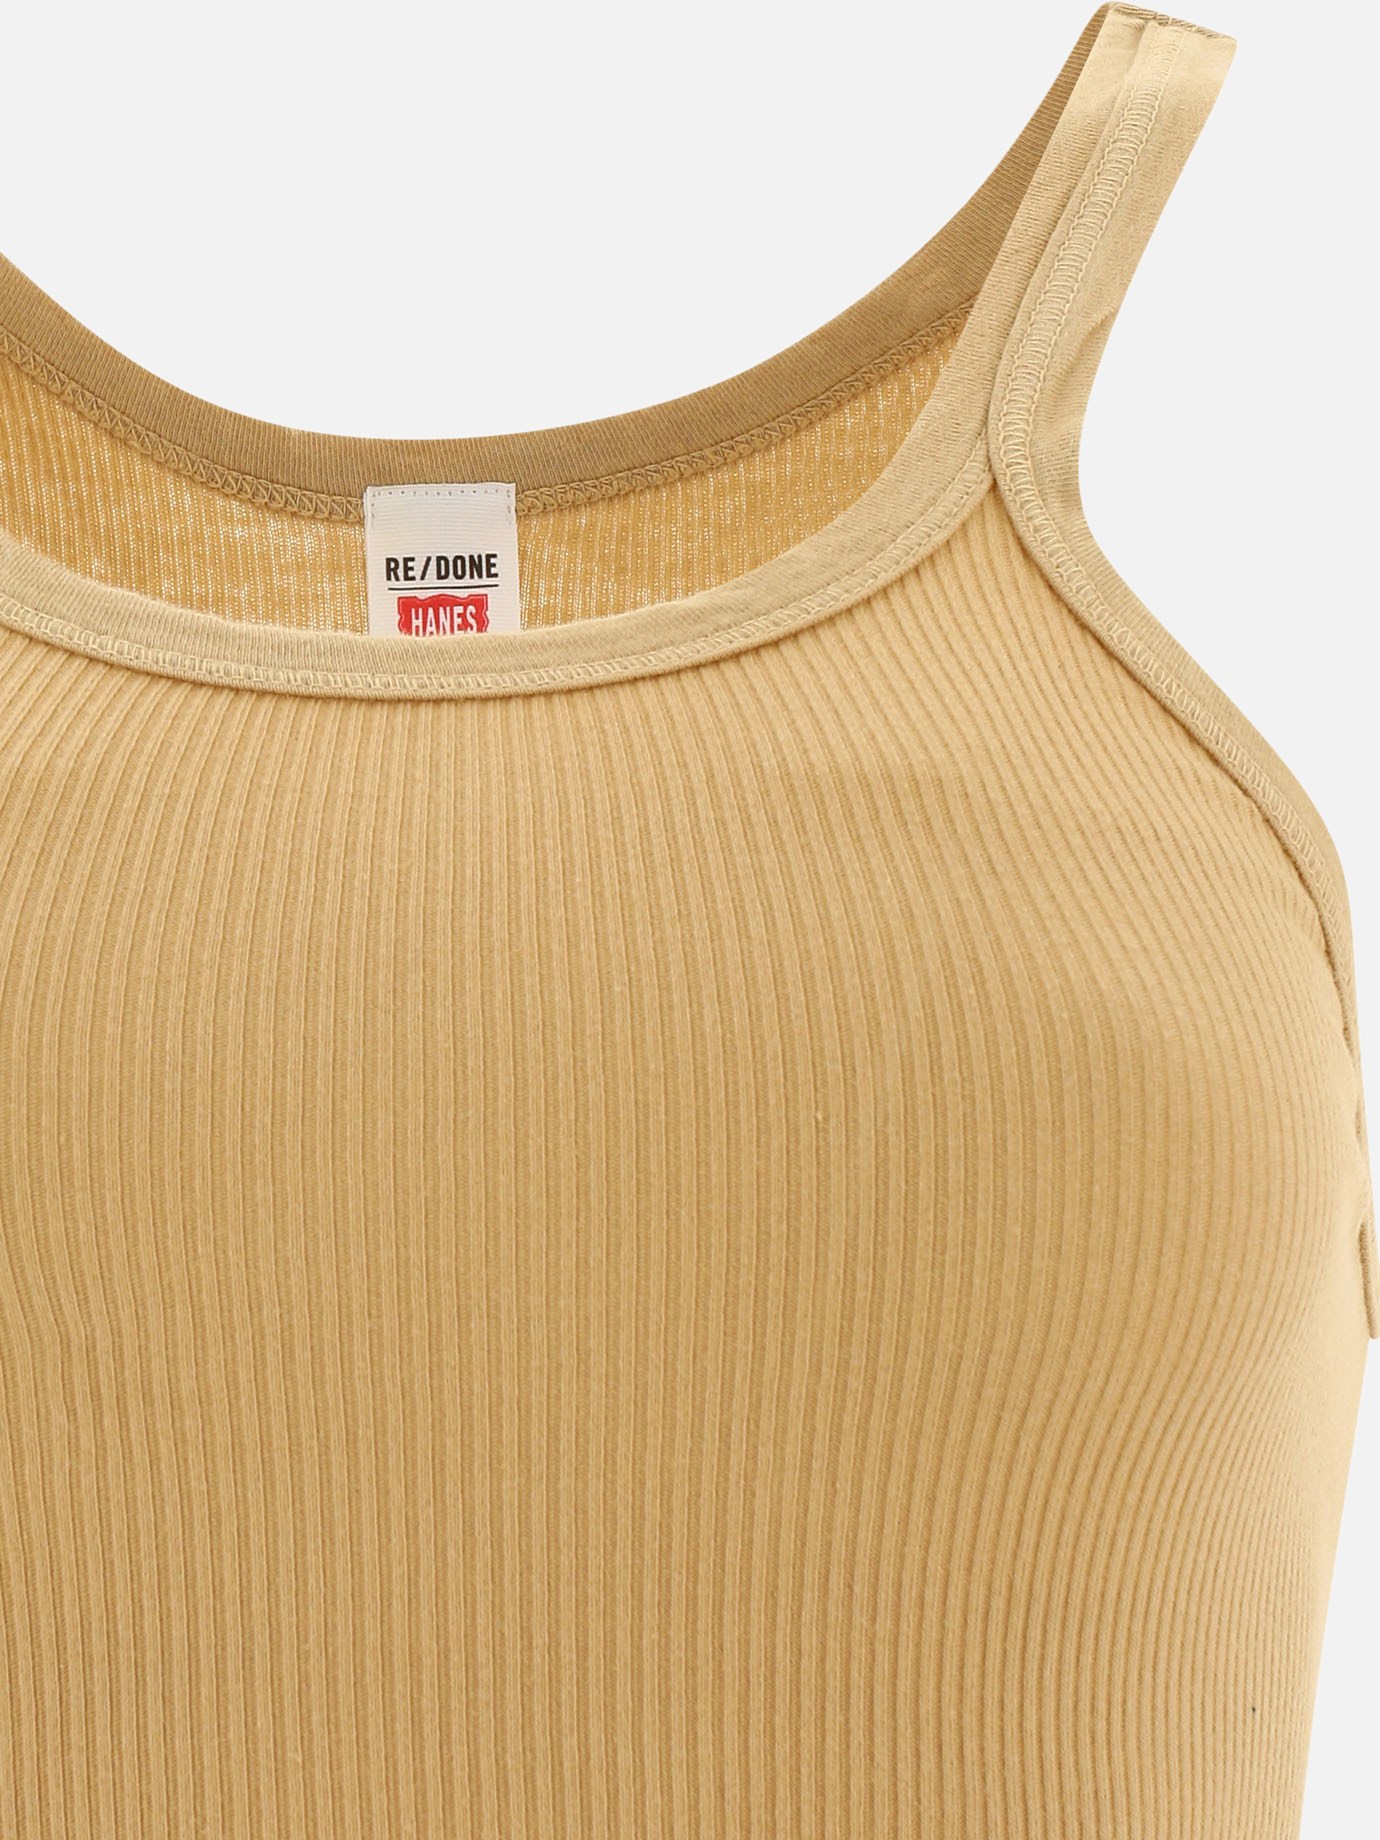 Ribbed tank top by RE/DONE